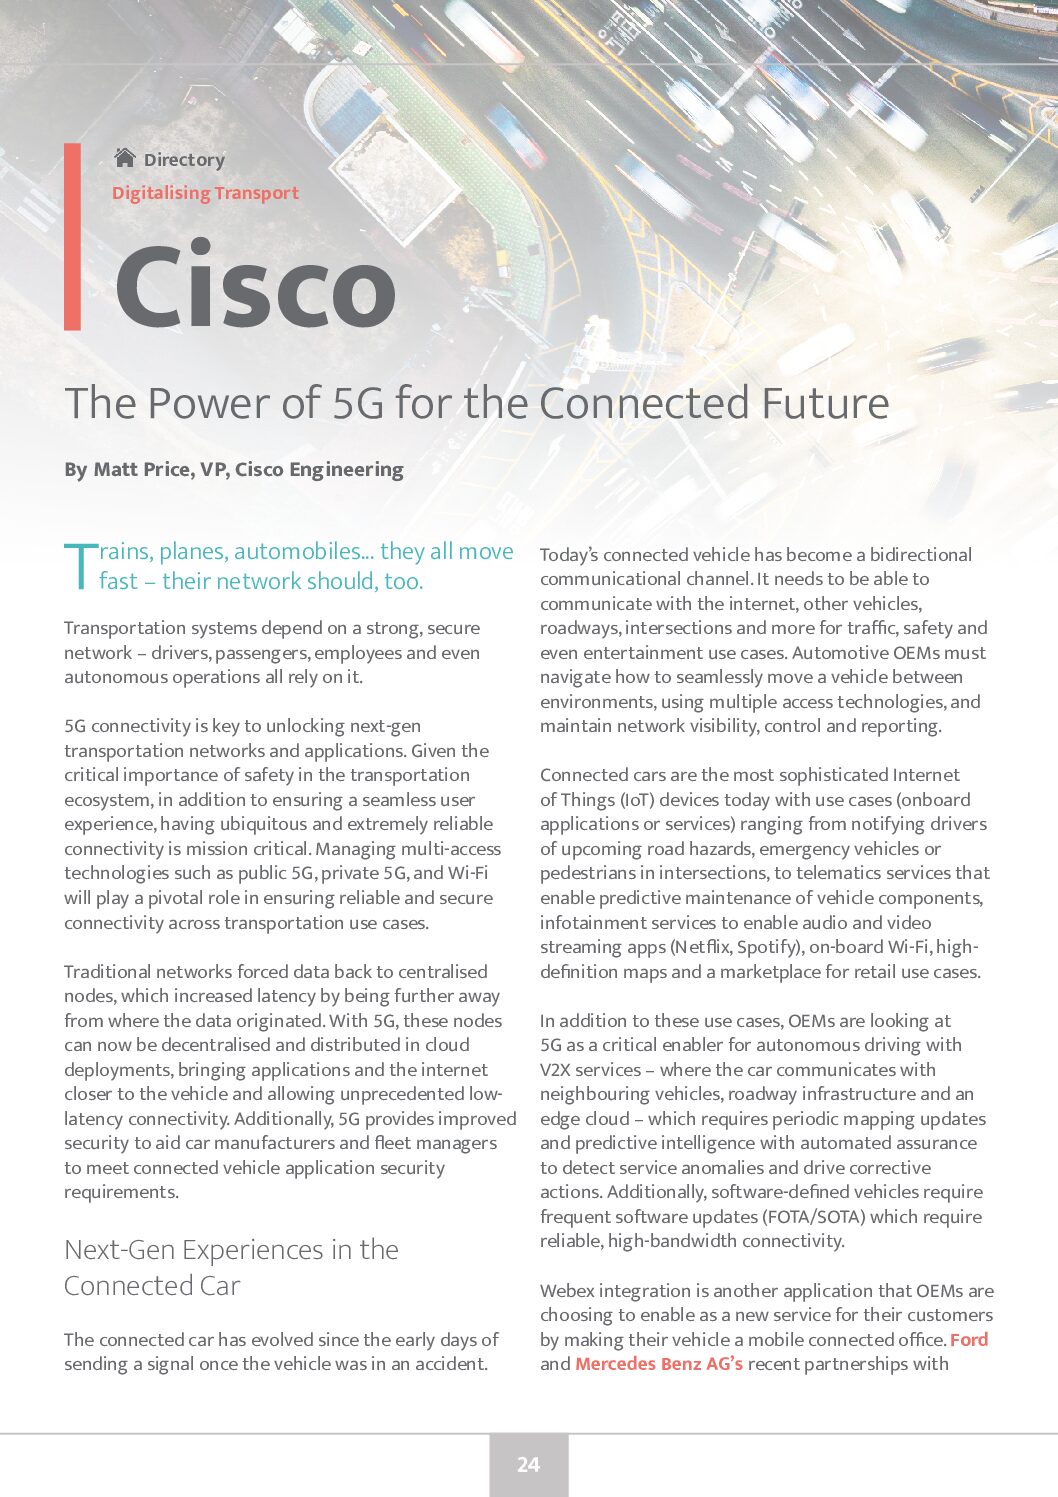 Cisco: The Power of 5G for the Connected Future